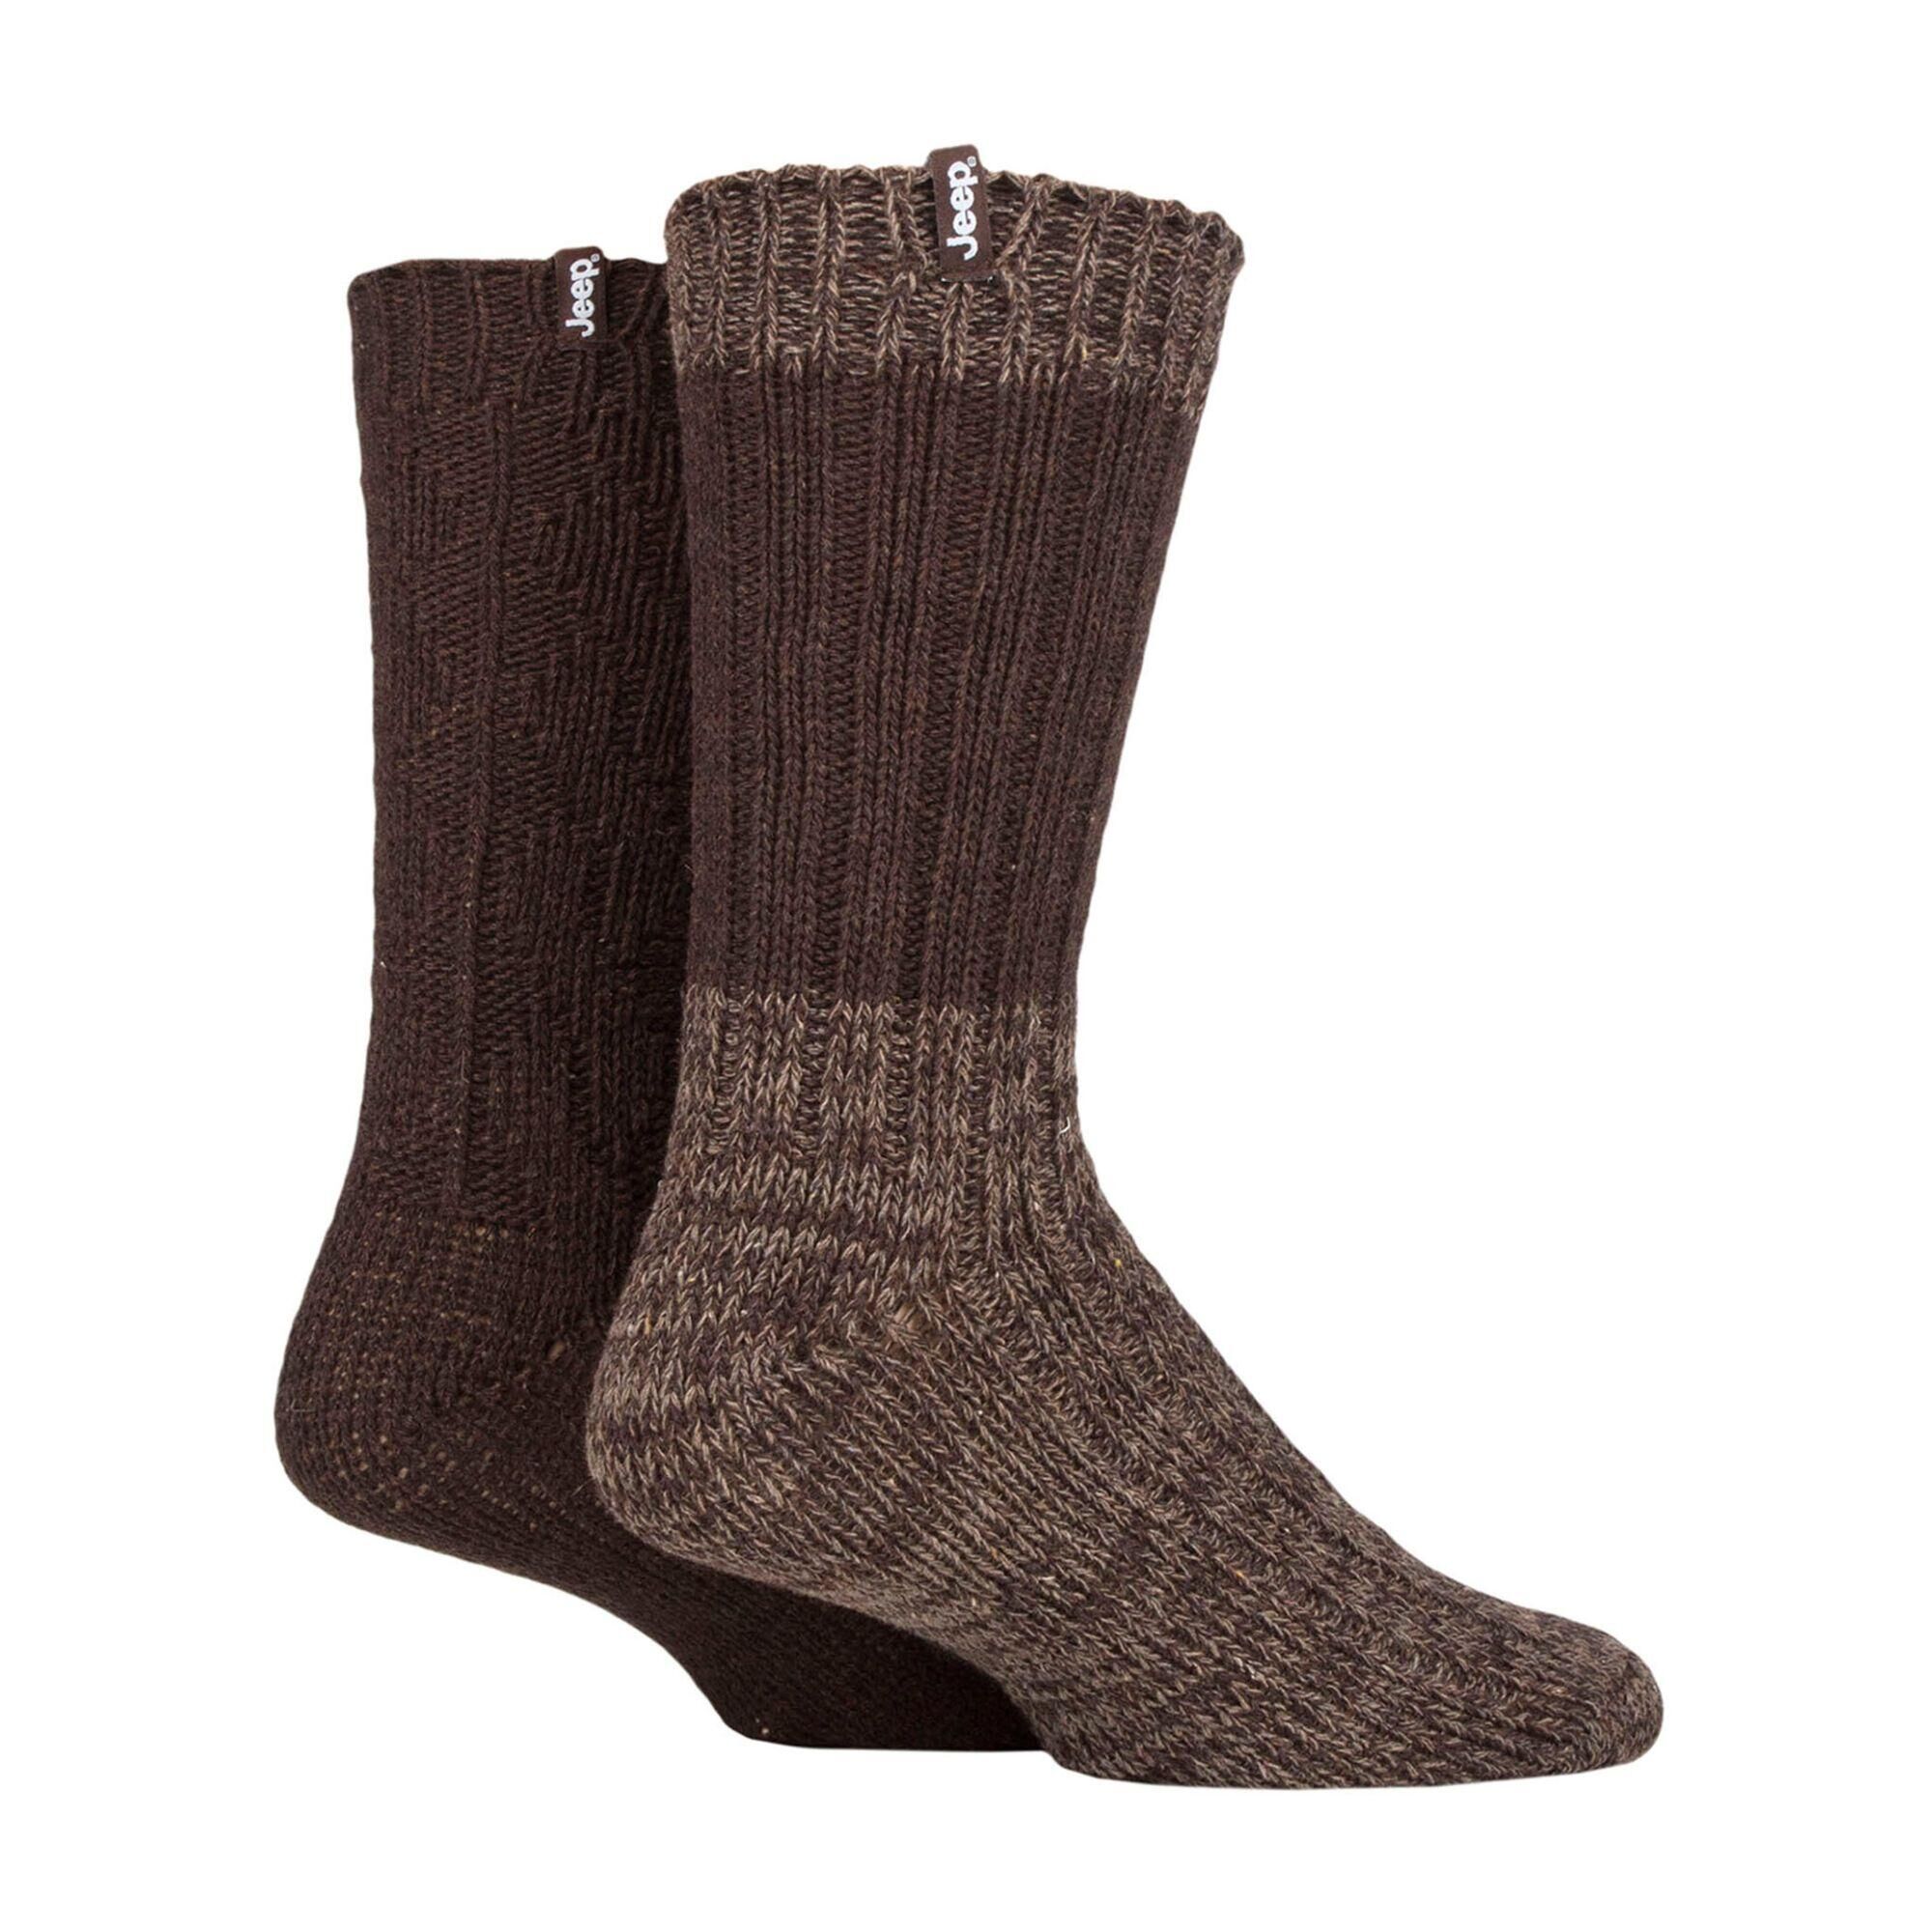 JEEP Mens Heavyweight Ribbed Cable Knit Wool Hiking Socks